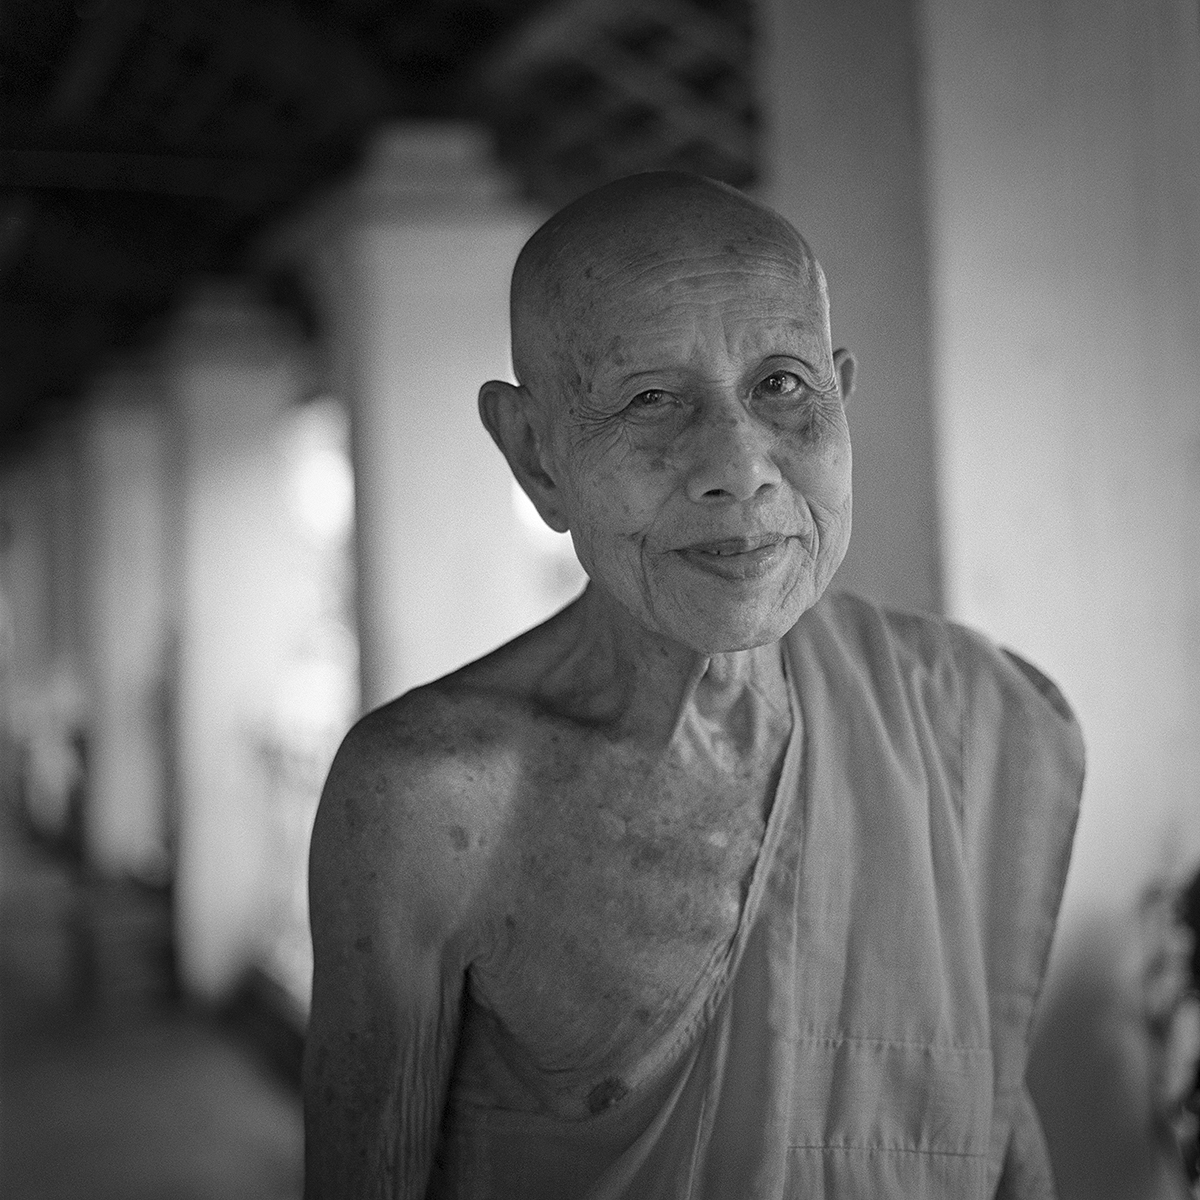 A old monk is in monastery. This portrait mean the way of life. I would like to be like this man.